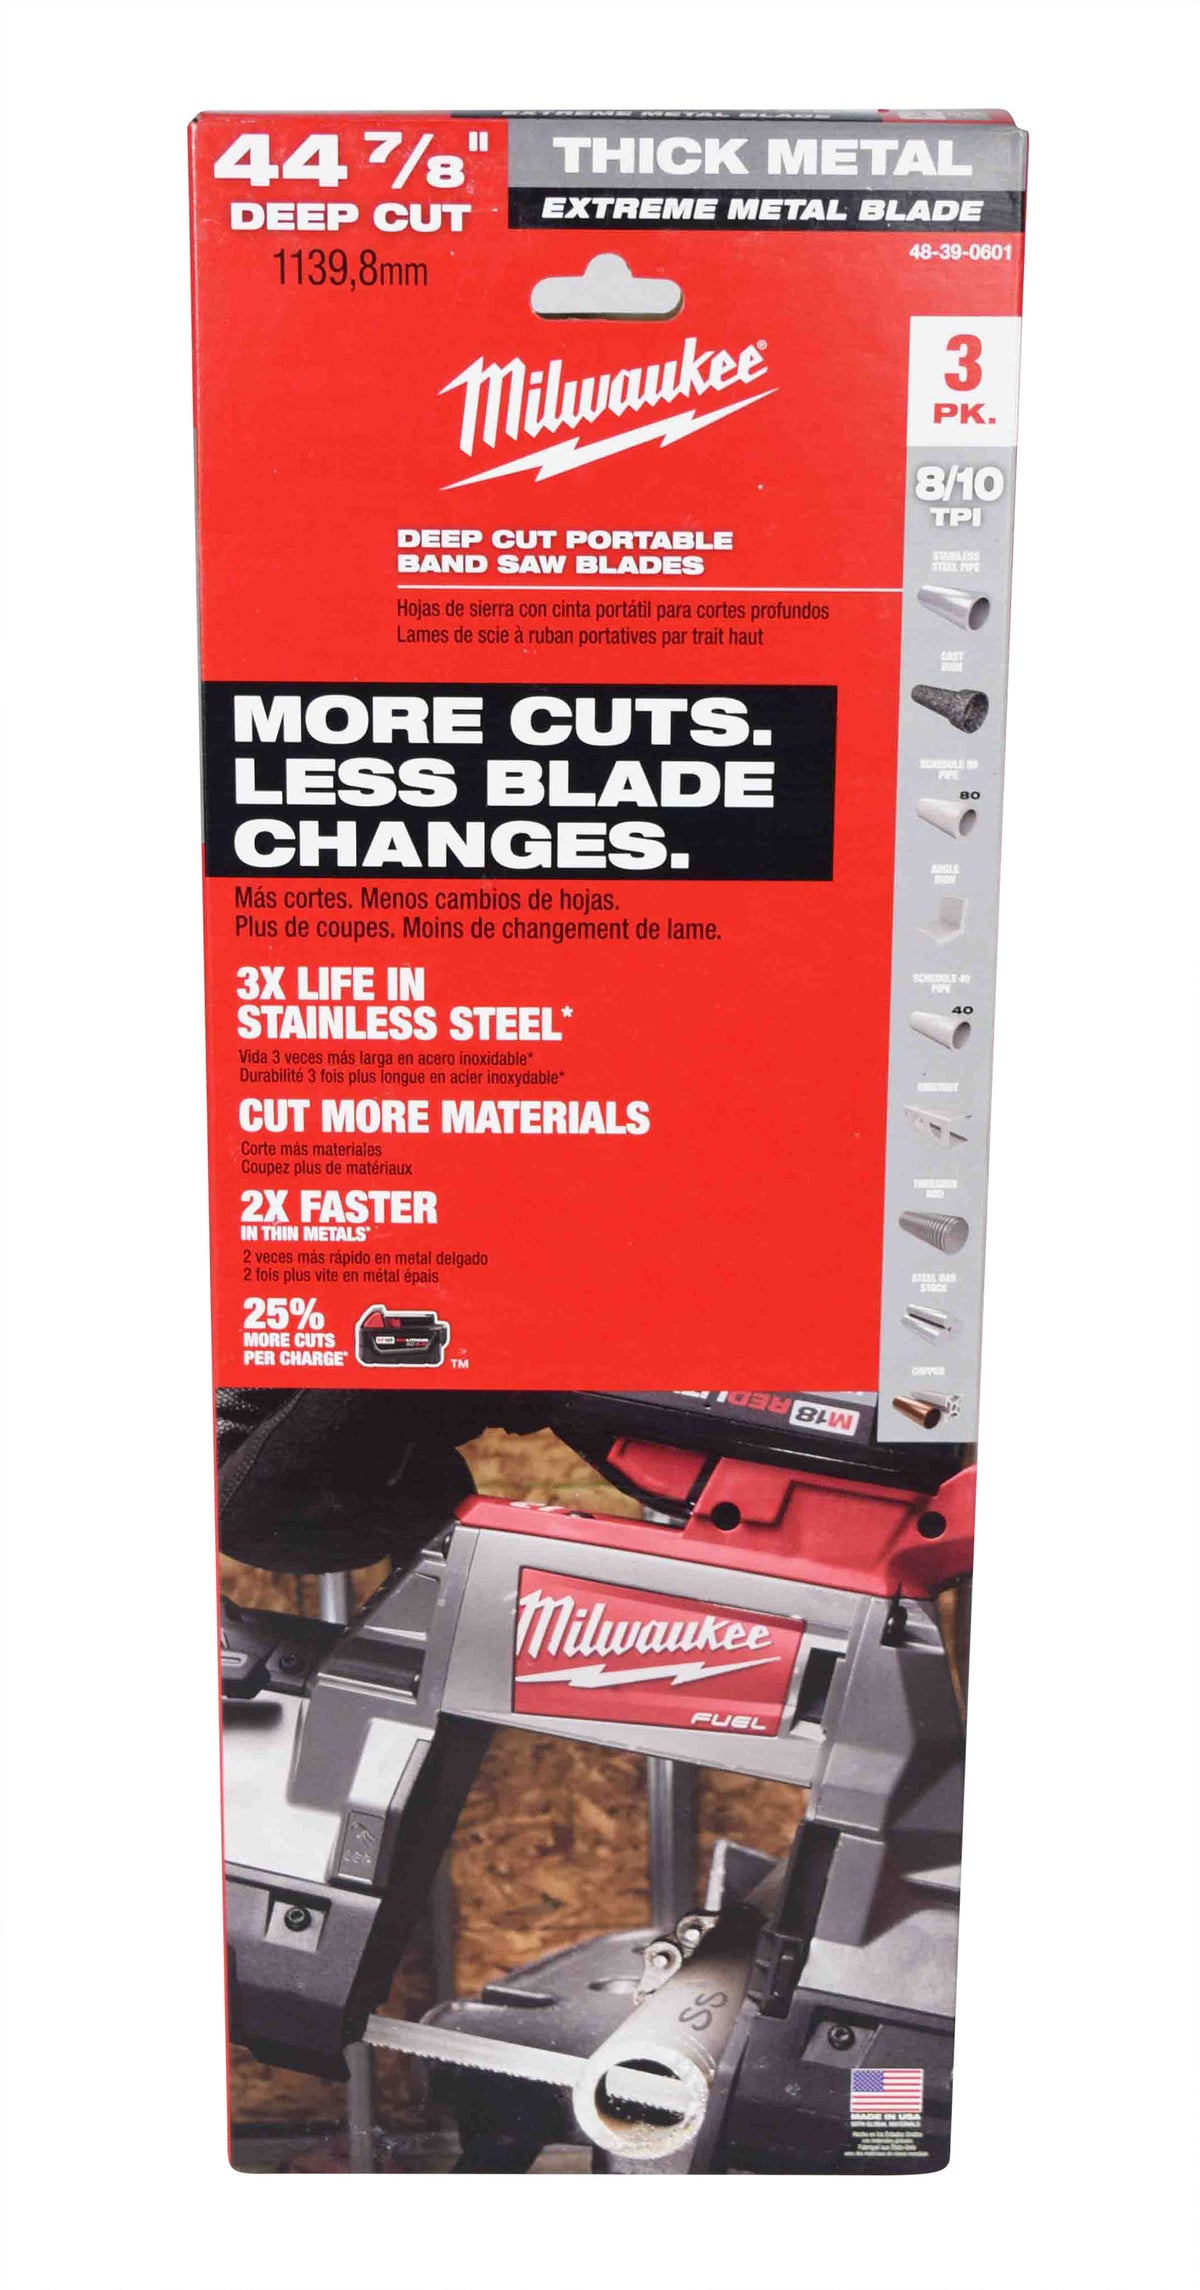 Milwaukee 48-39-0601 44-7/8inch Bandsaw Blades Extreme Thick Metal Deep Cut 8/10 TPI (3 Pack)